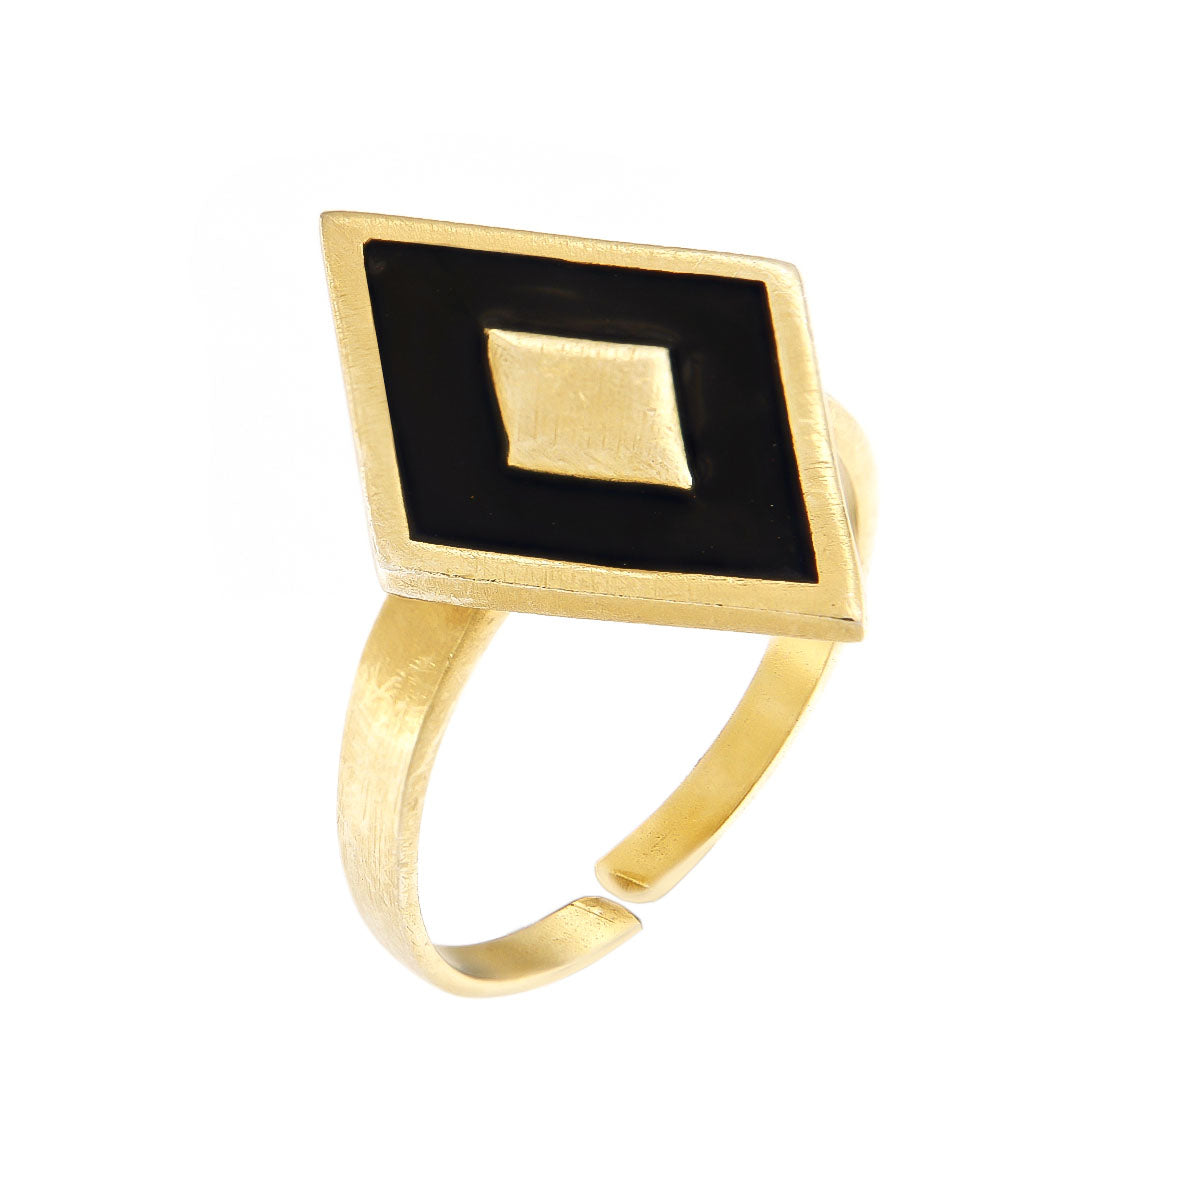 Irene ring, silver 925° gold plated 22k by Pearl Martini